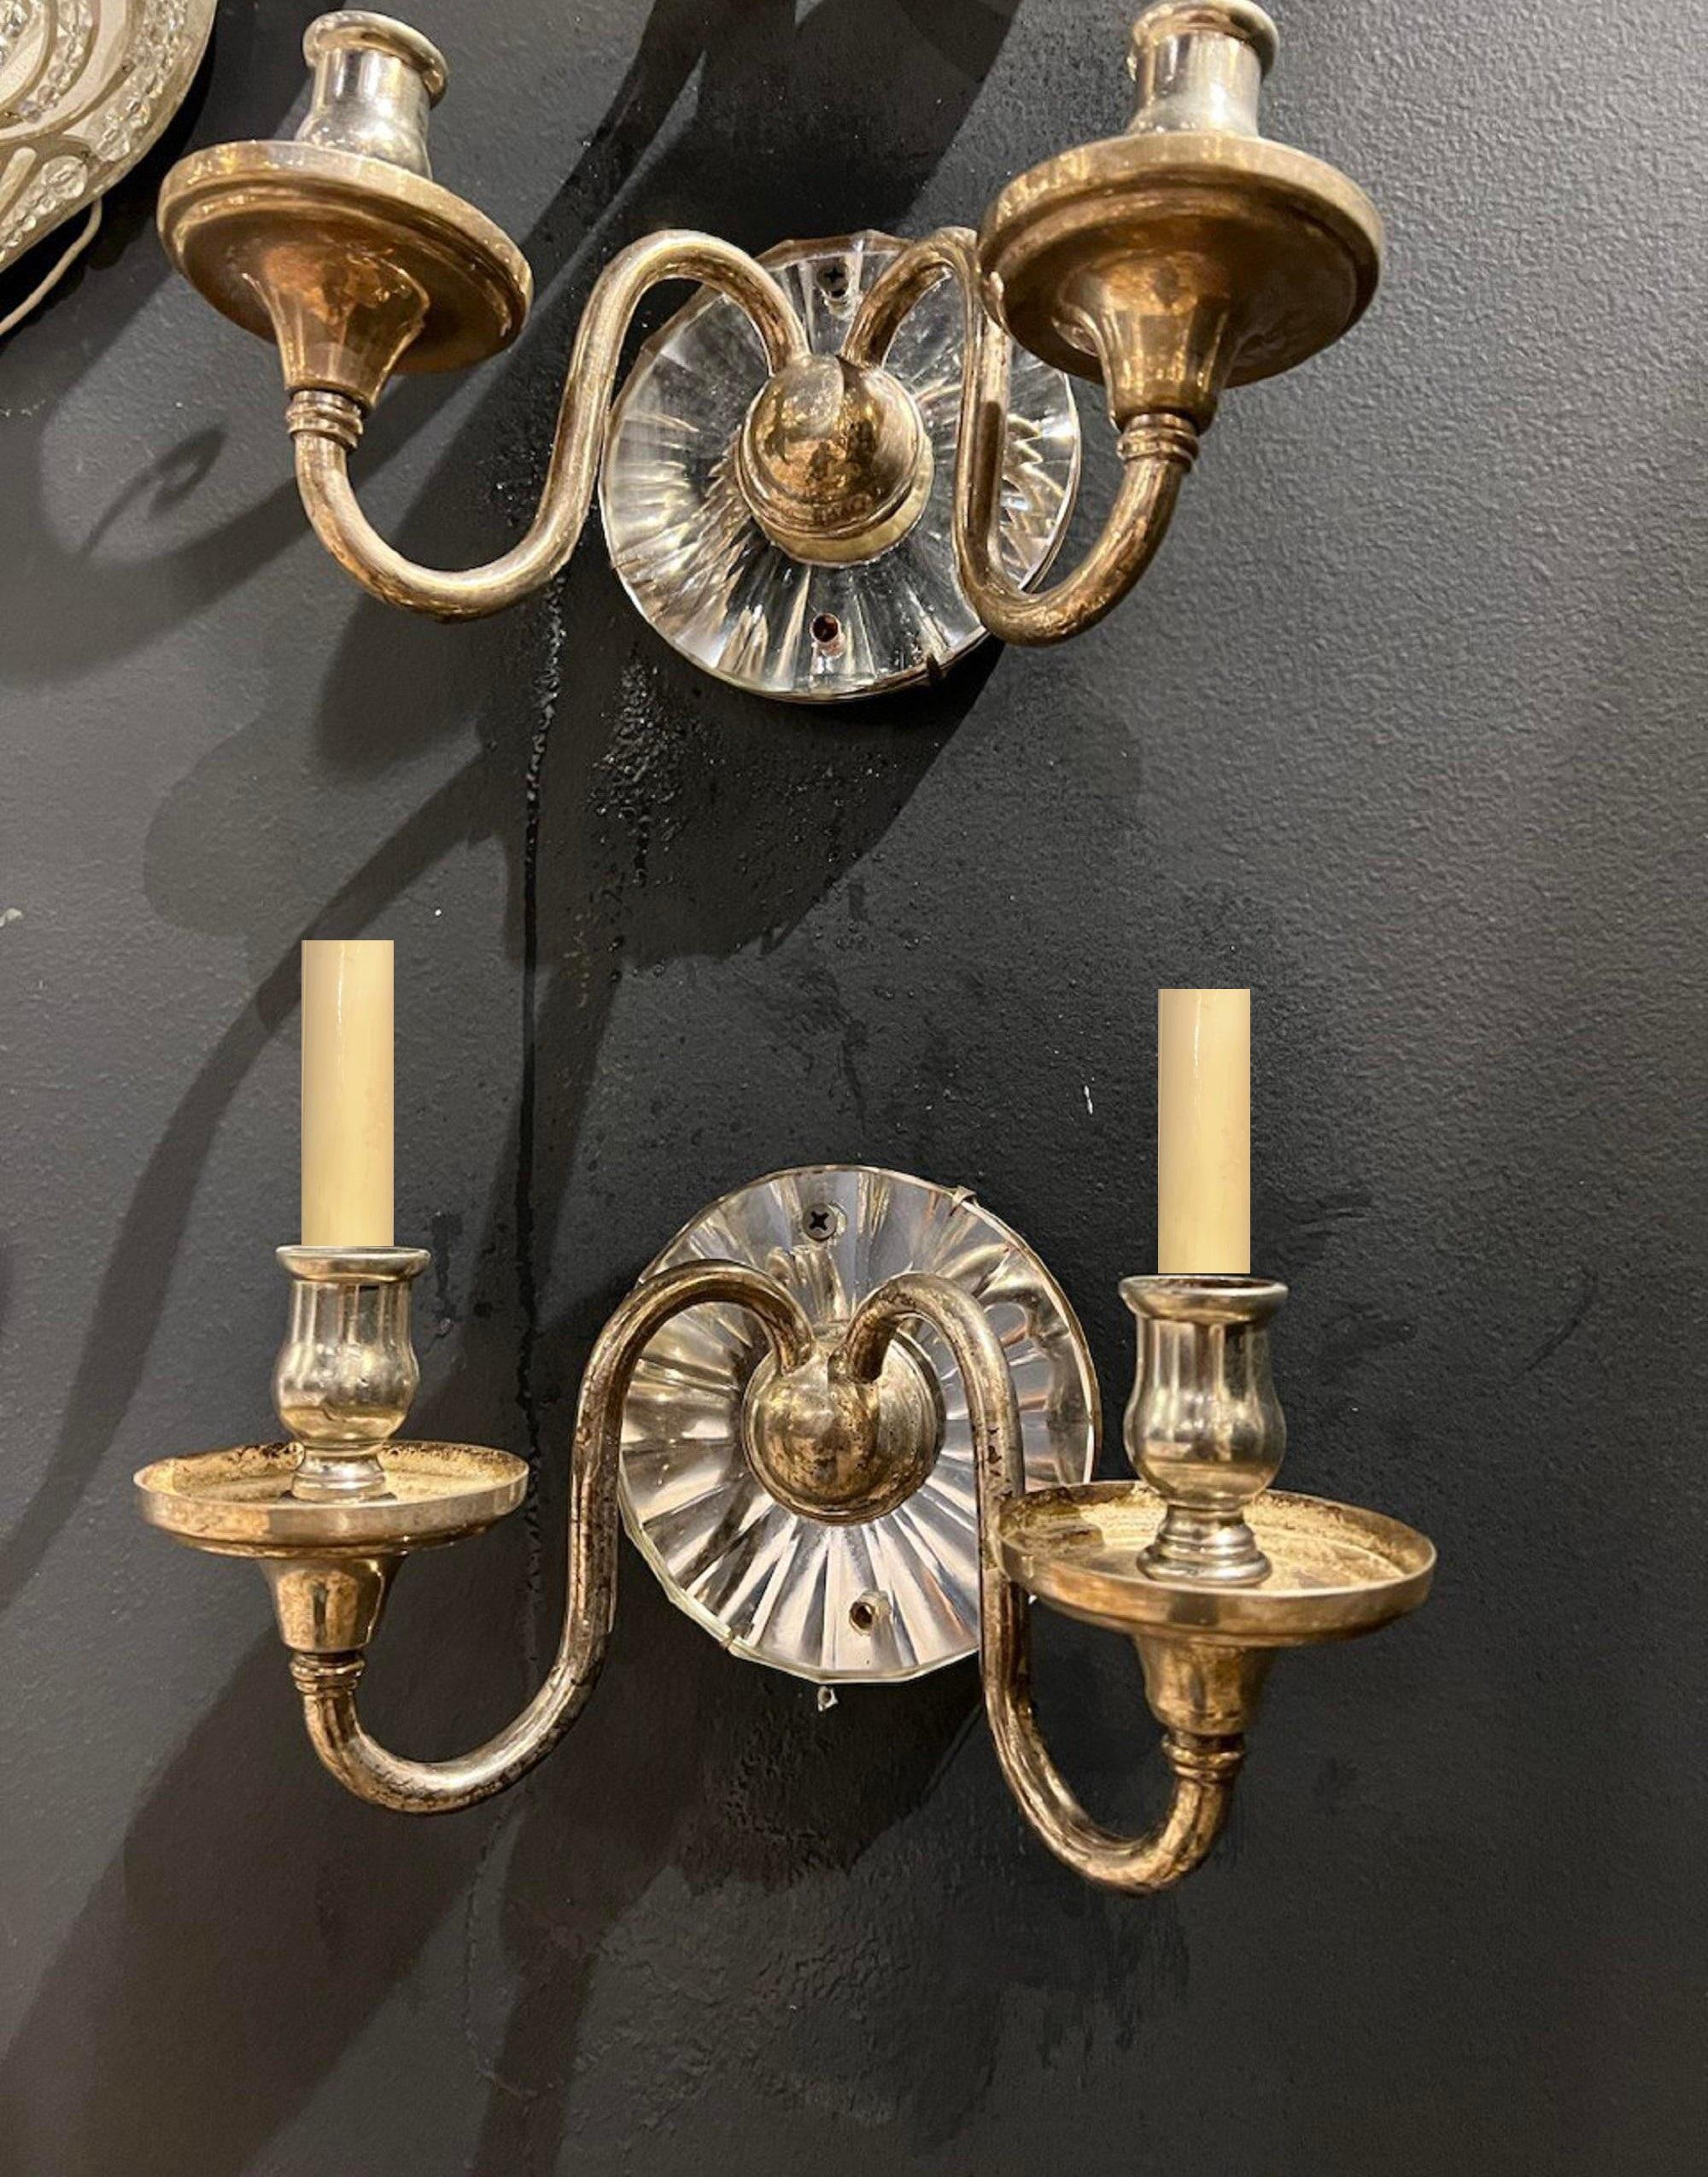 A pair of circa 1920's  American silver plated sconces with mirror backplate and two lights